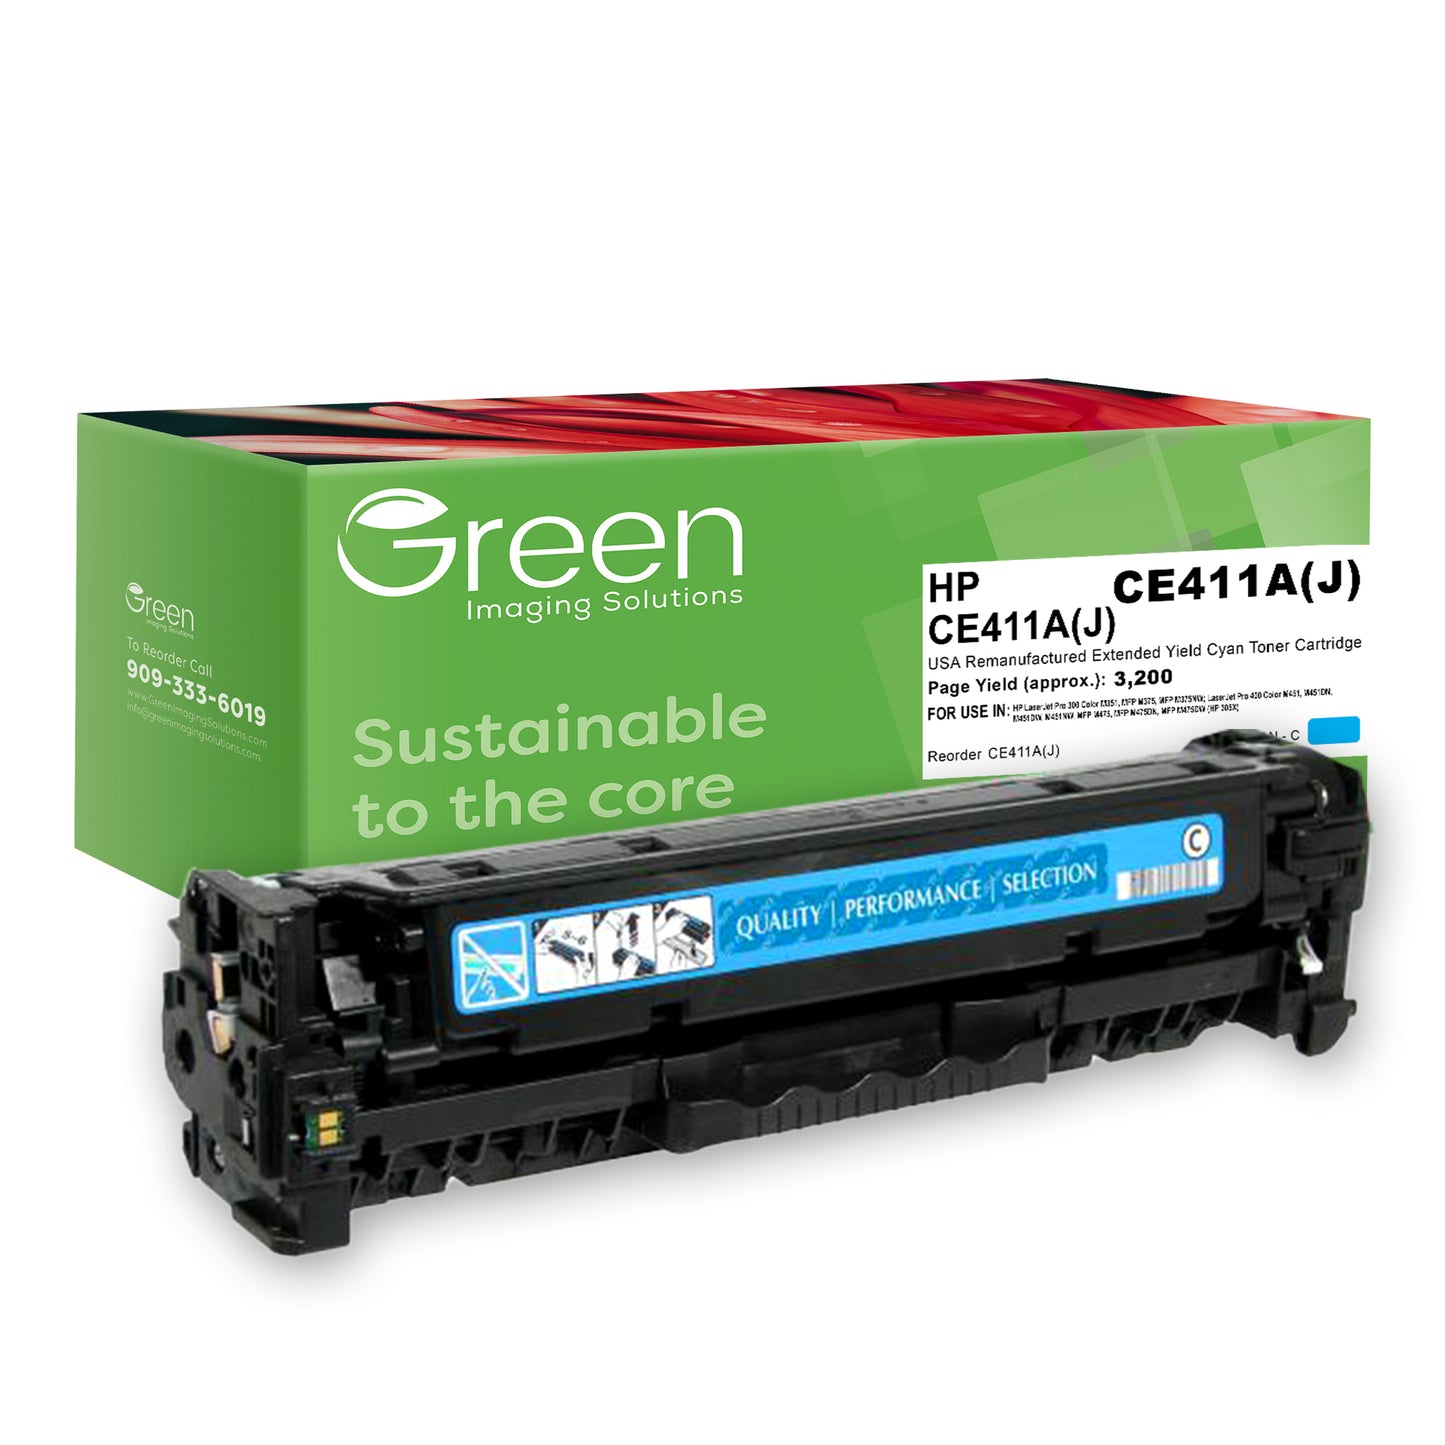 GIS USA Remanufactured Extended Yield Cyan Toner Cartridge for HP CE411A (HP 305A)